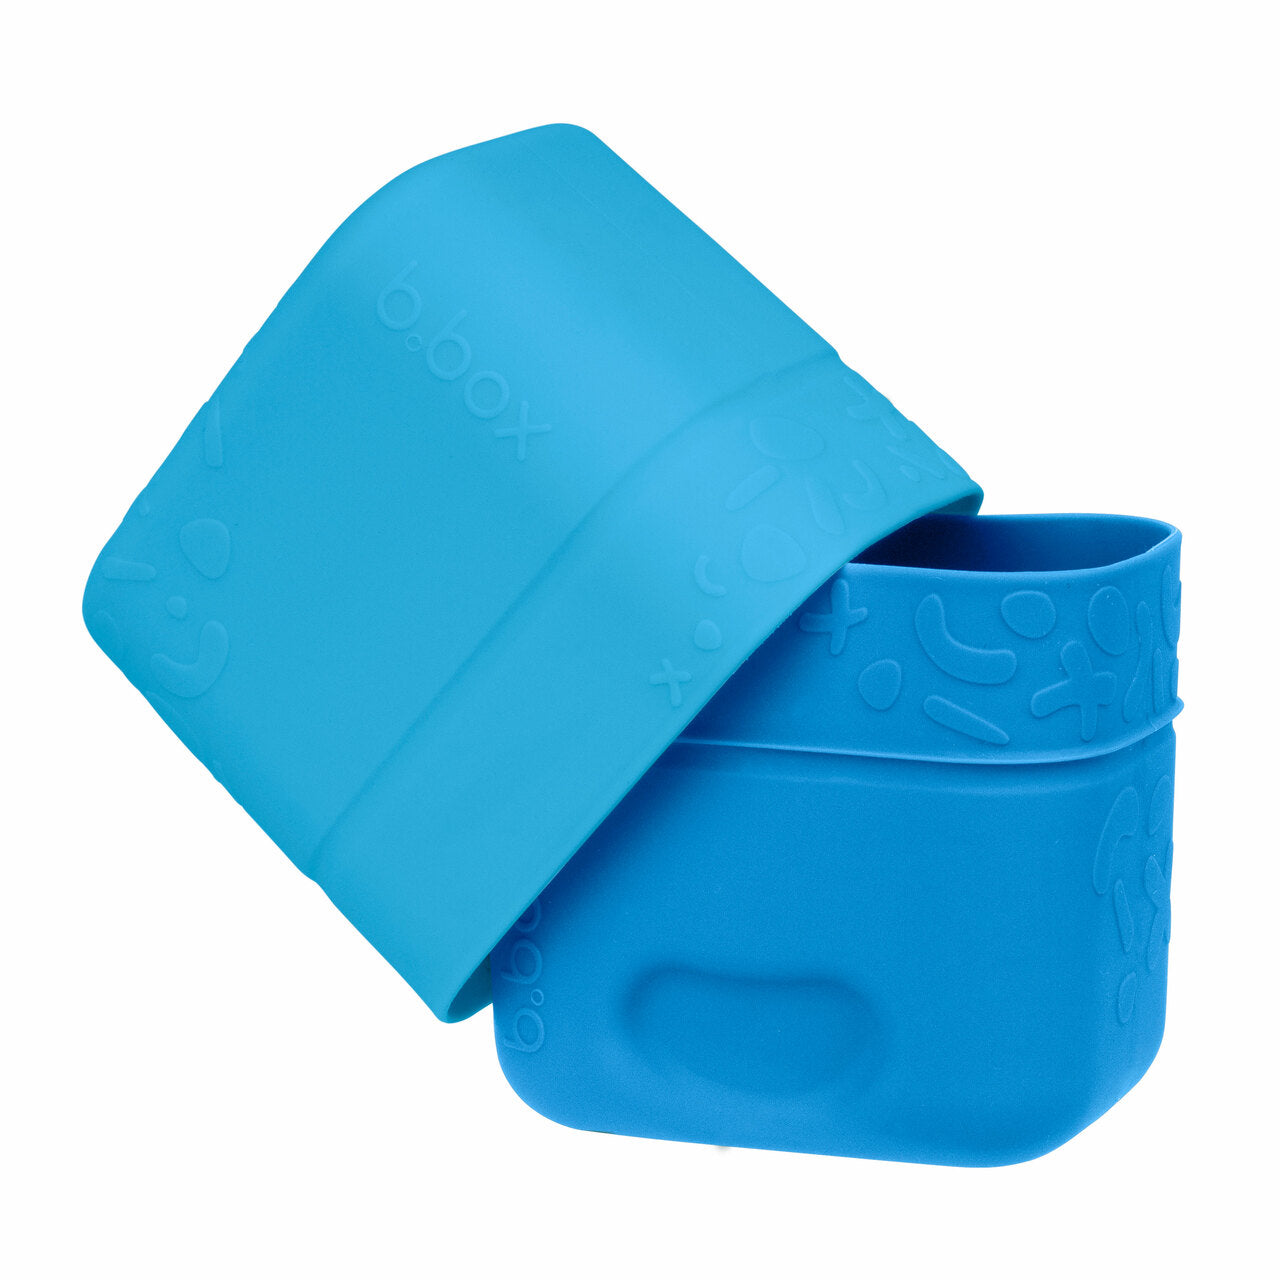 B.box Silicone Snack Cup in Ocean available at Bear & Moo